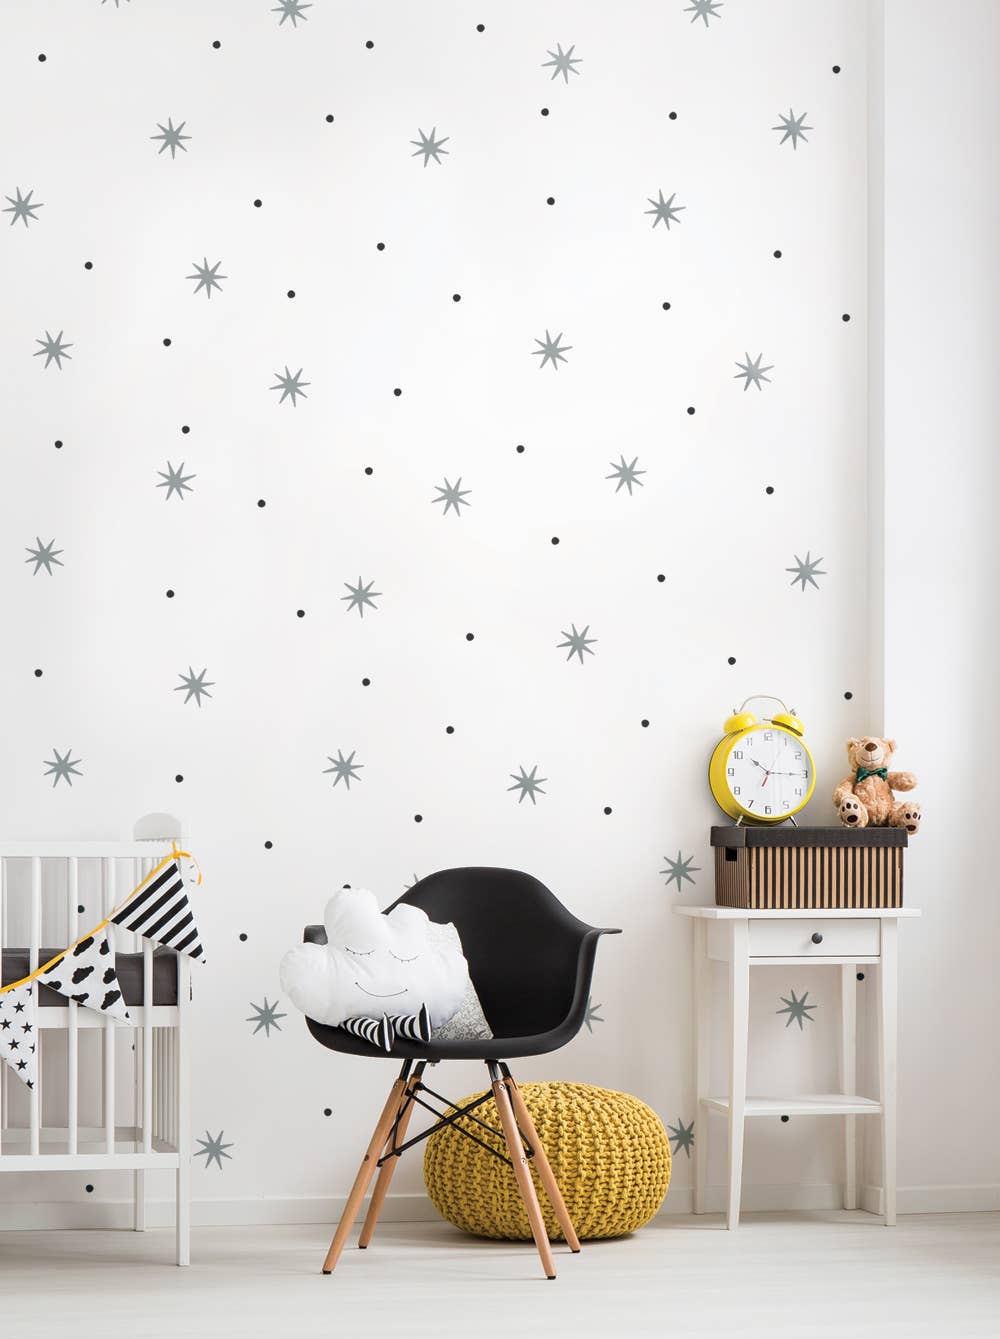 Star Dot Wall Decal Stickers